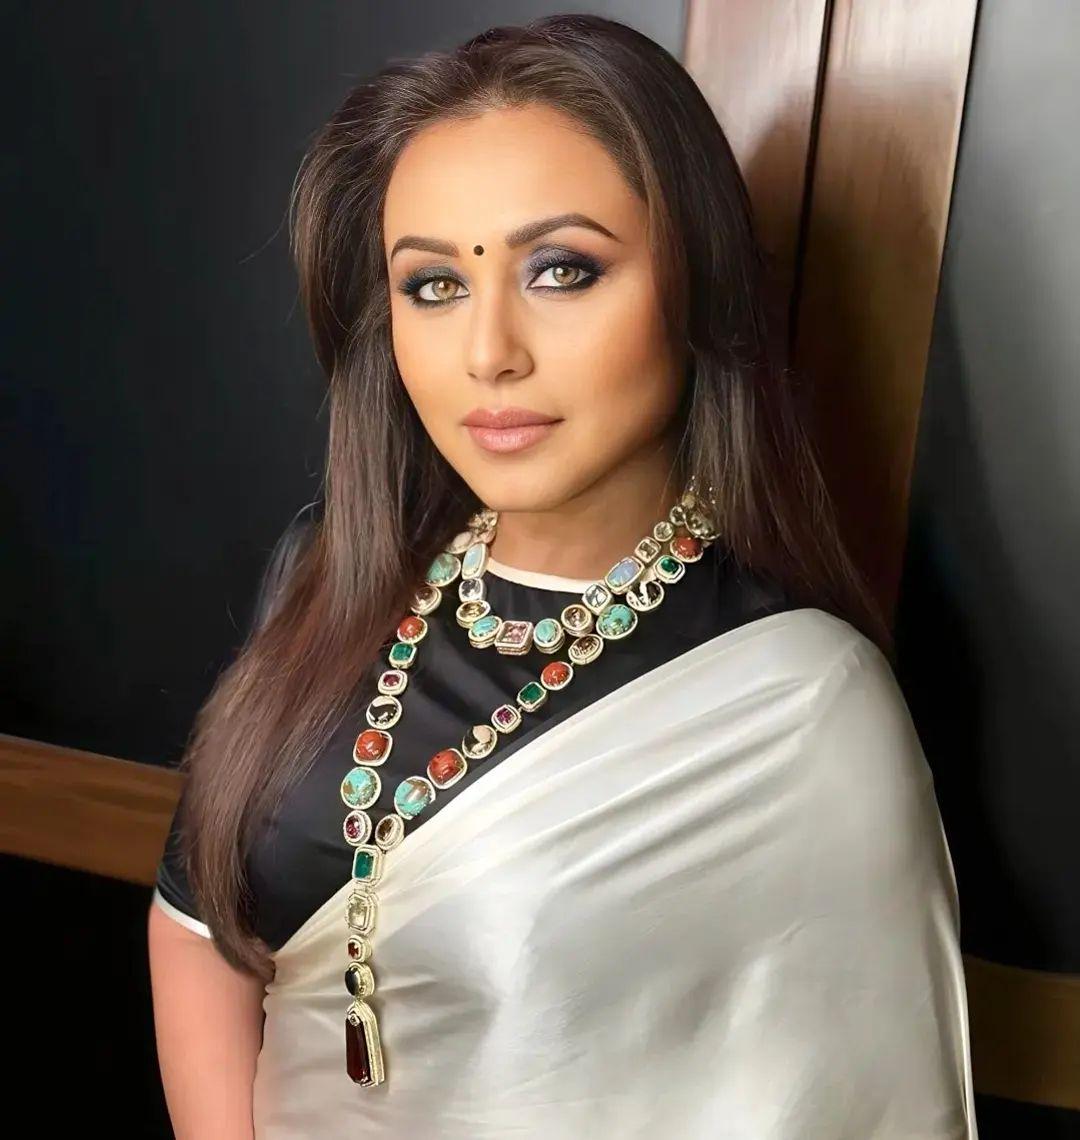 Rani Mukerji leaves no stone unturned to prove that she can slay any kind of look, from western to traditional